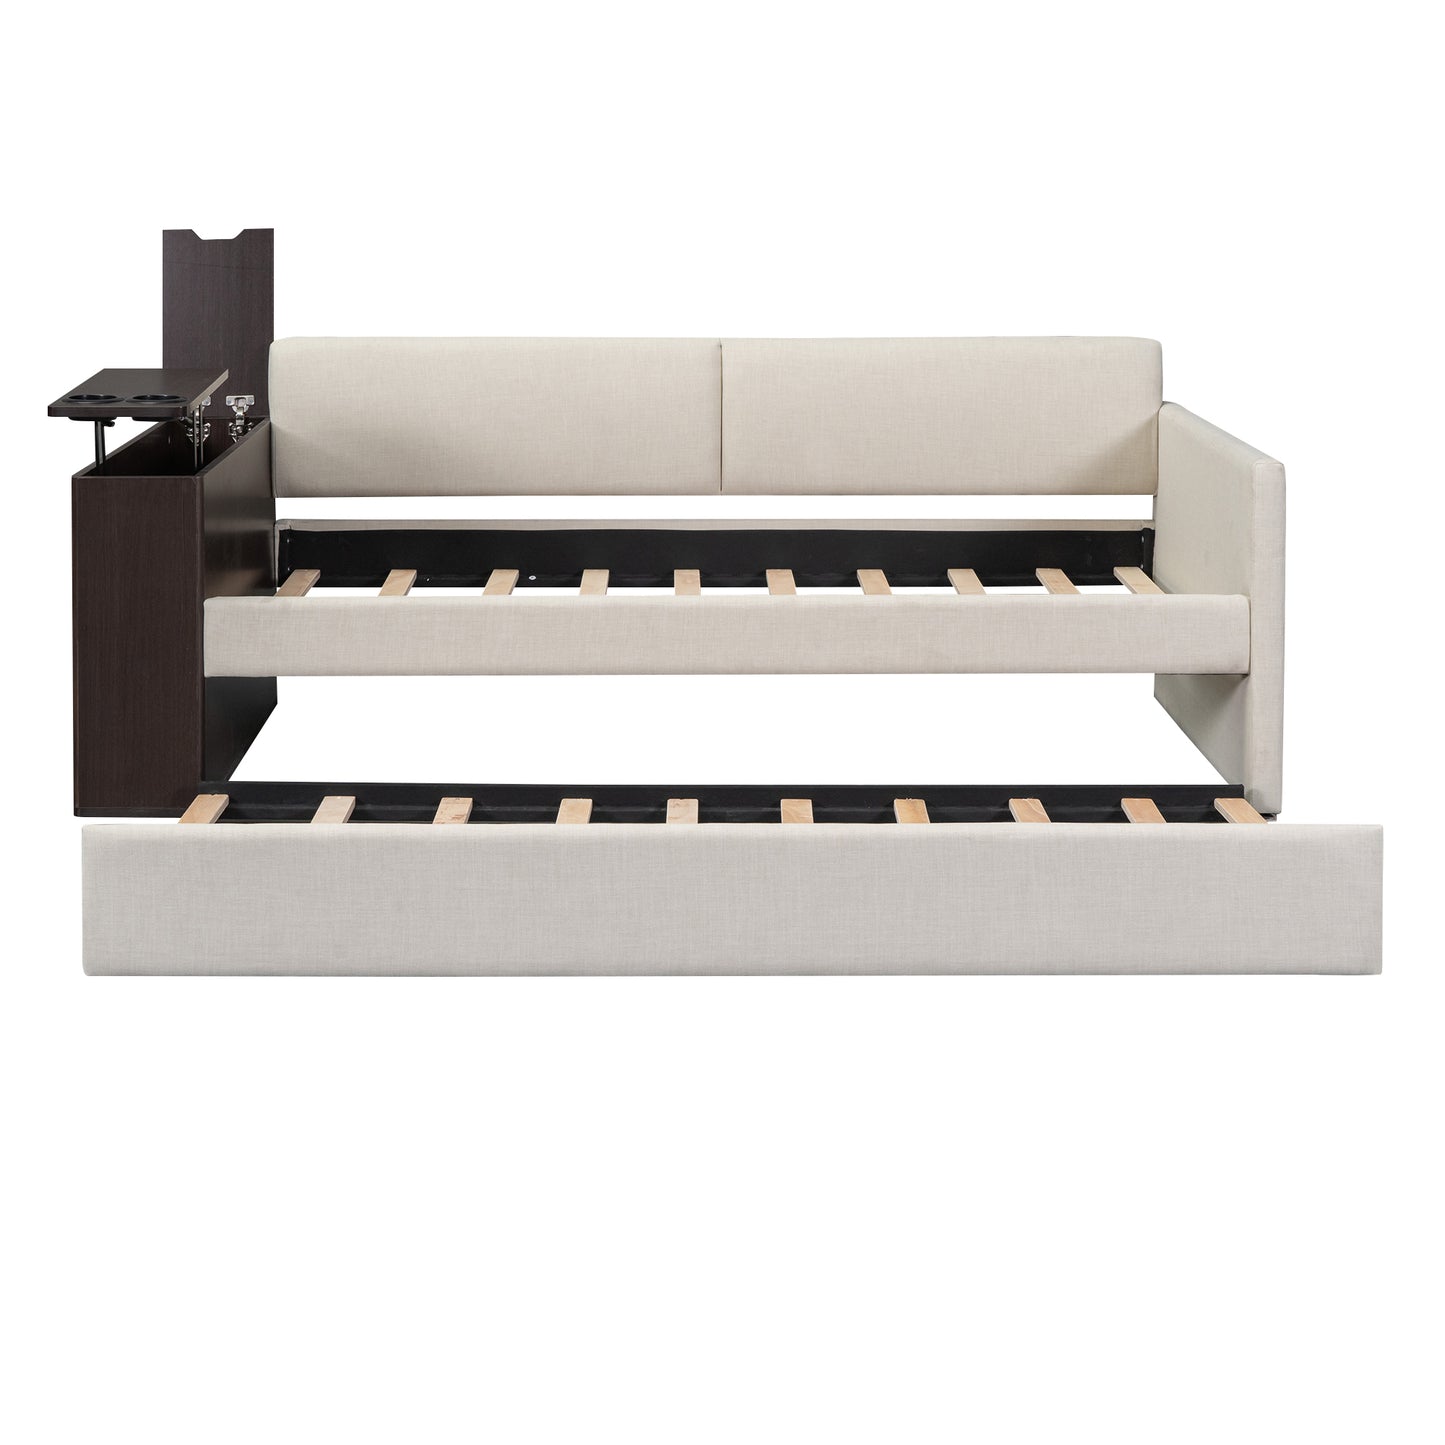 Twin Size Upholstery Daybed with Storage Arm, Trundle, Cup Holder and USB Design, Beige